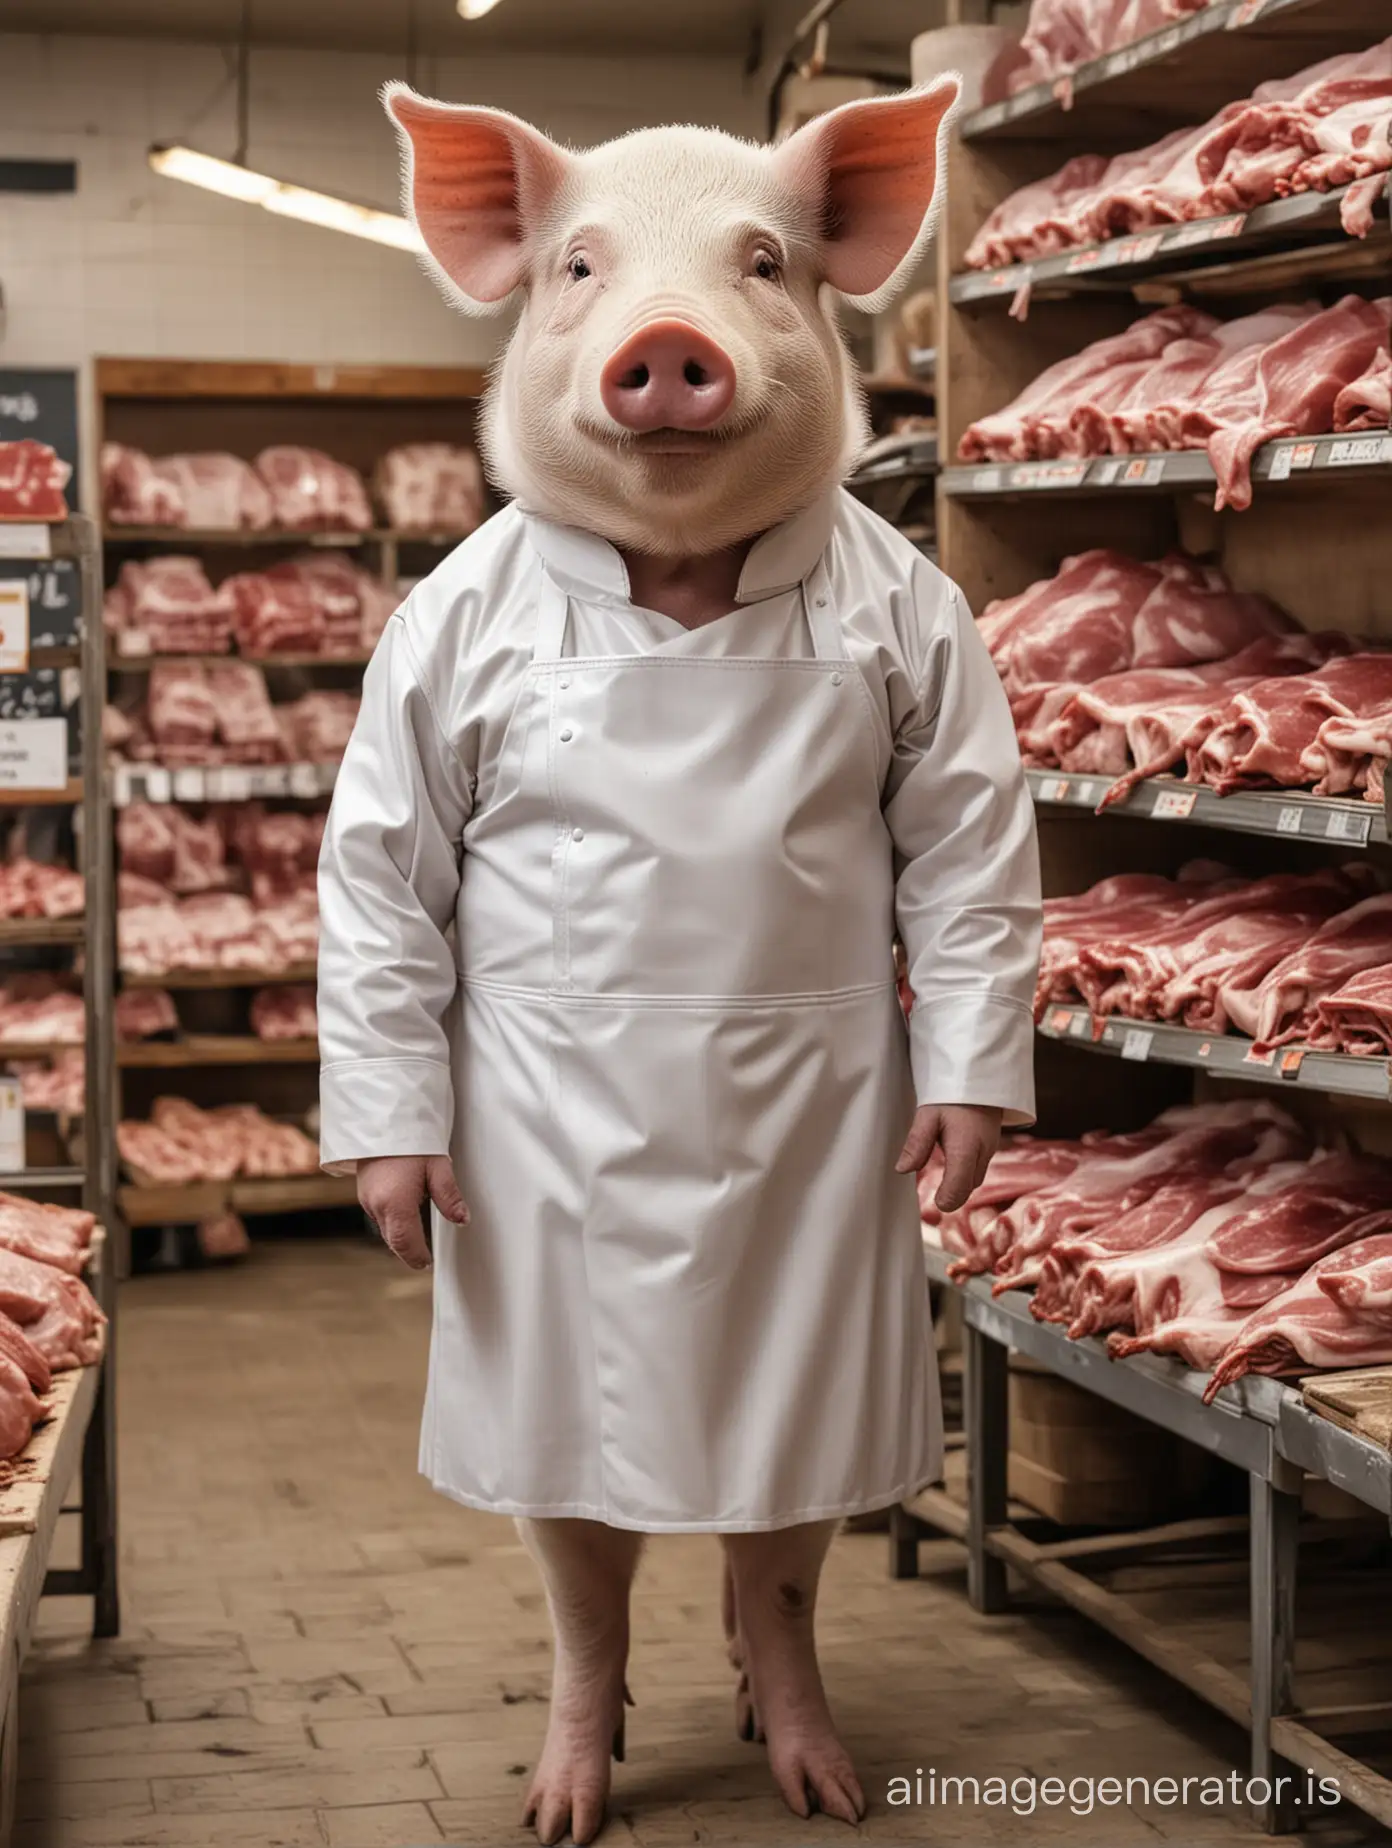 Pig-Butcher-in-Elegant-White-Dress-and-Leather-Suit-at-Meat-Store